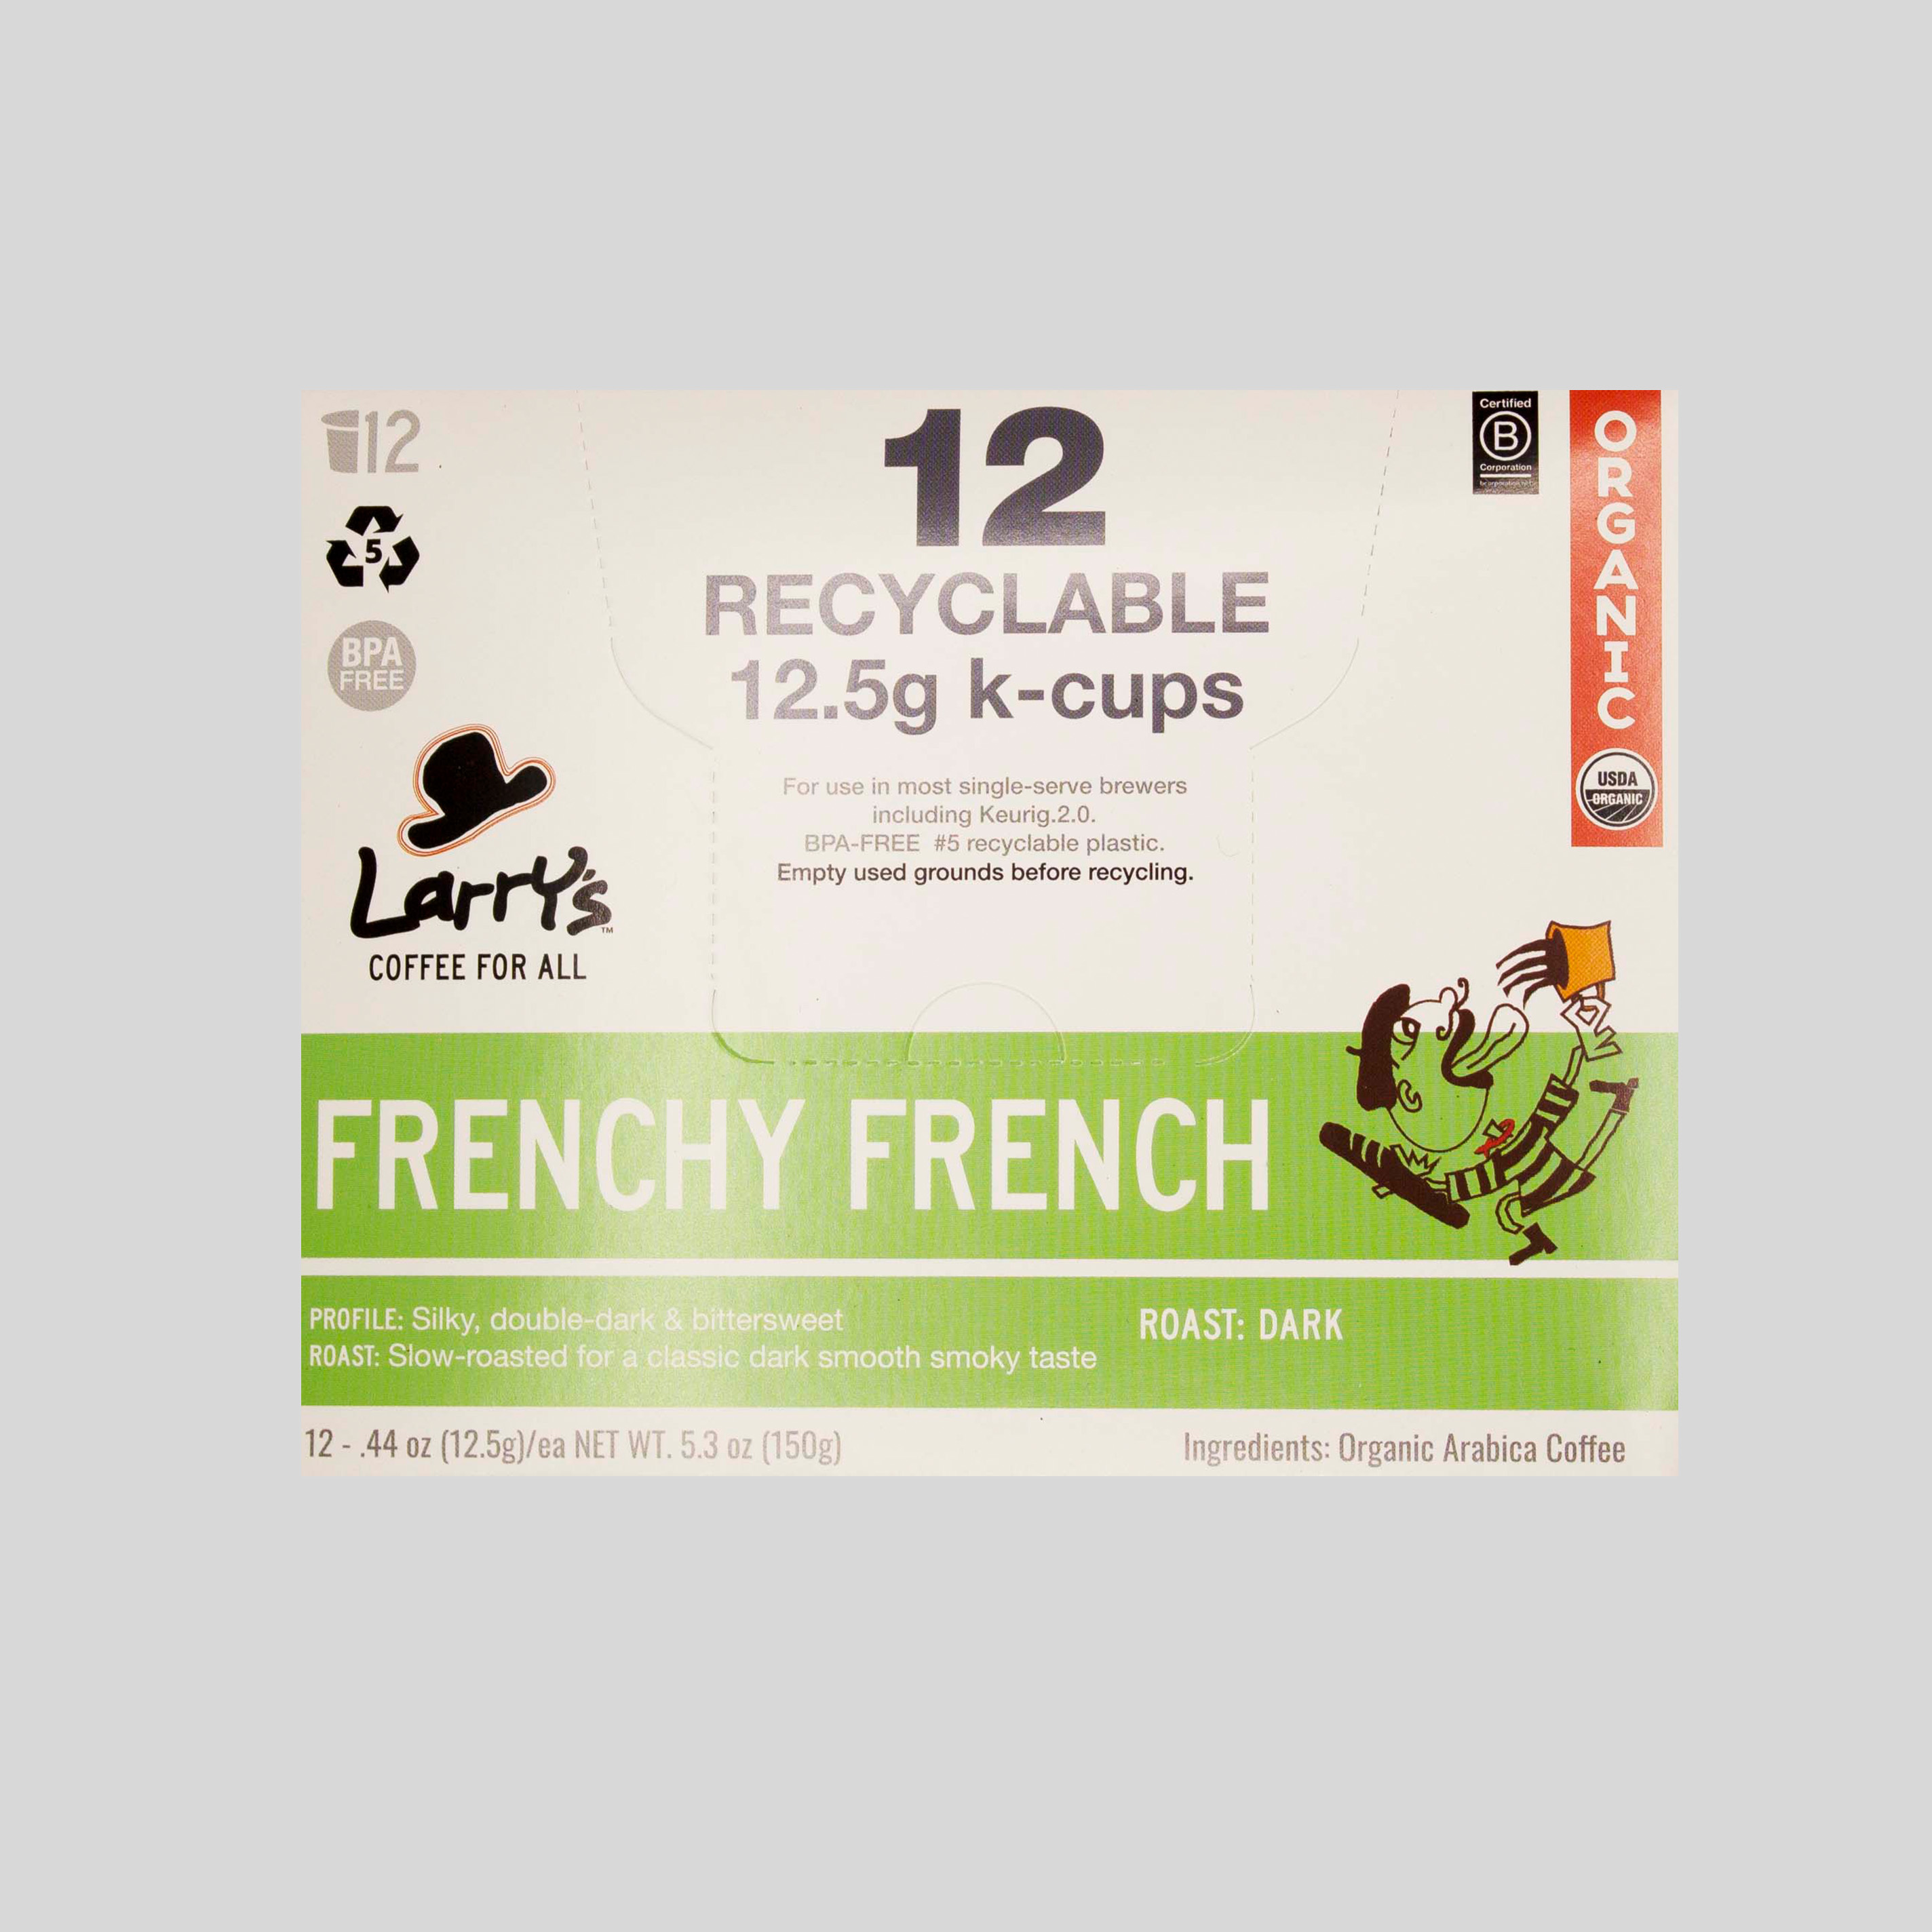 k-cup: Frenchy French